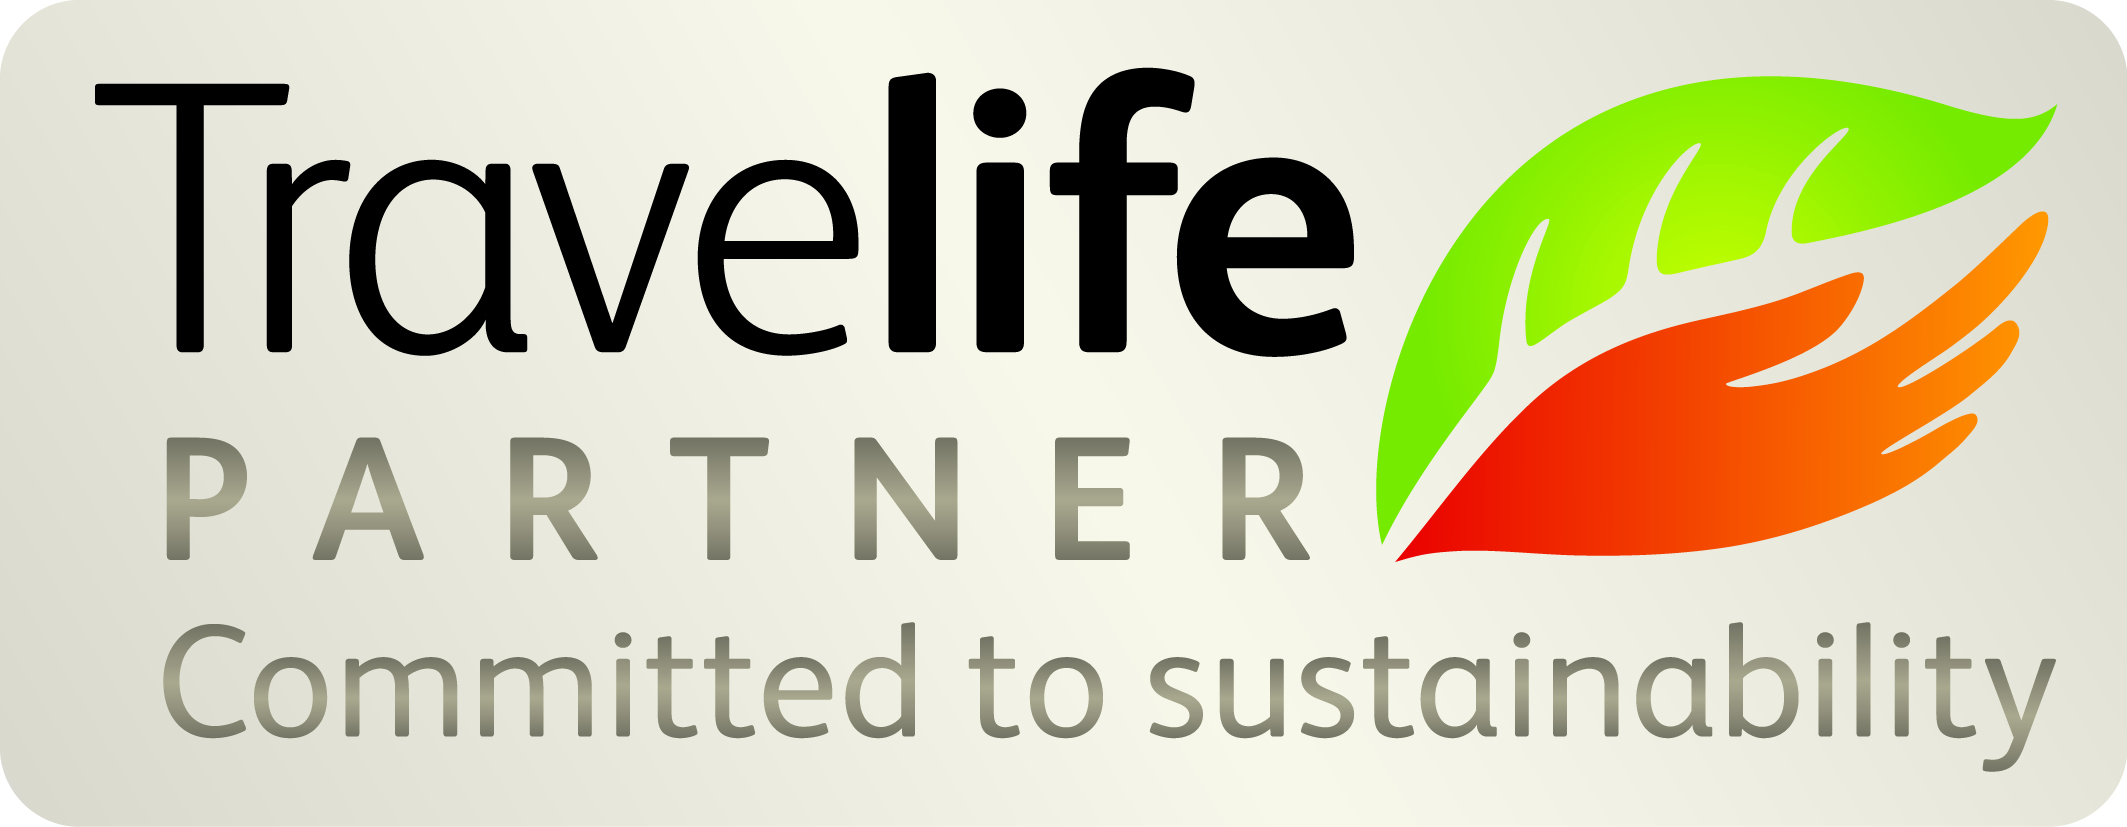 Kapwa is not Travelife Partner and we are committed to sustainability